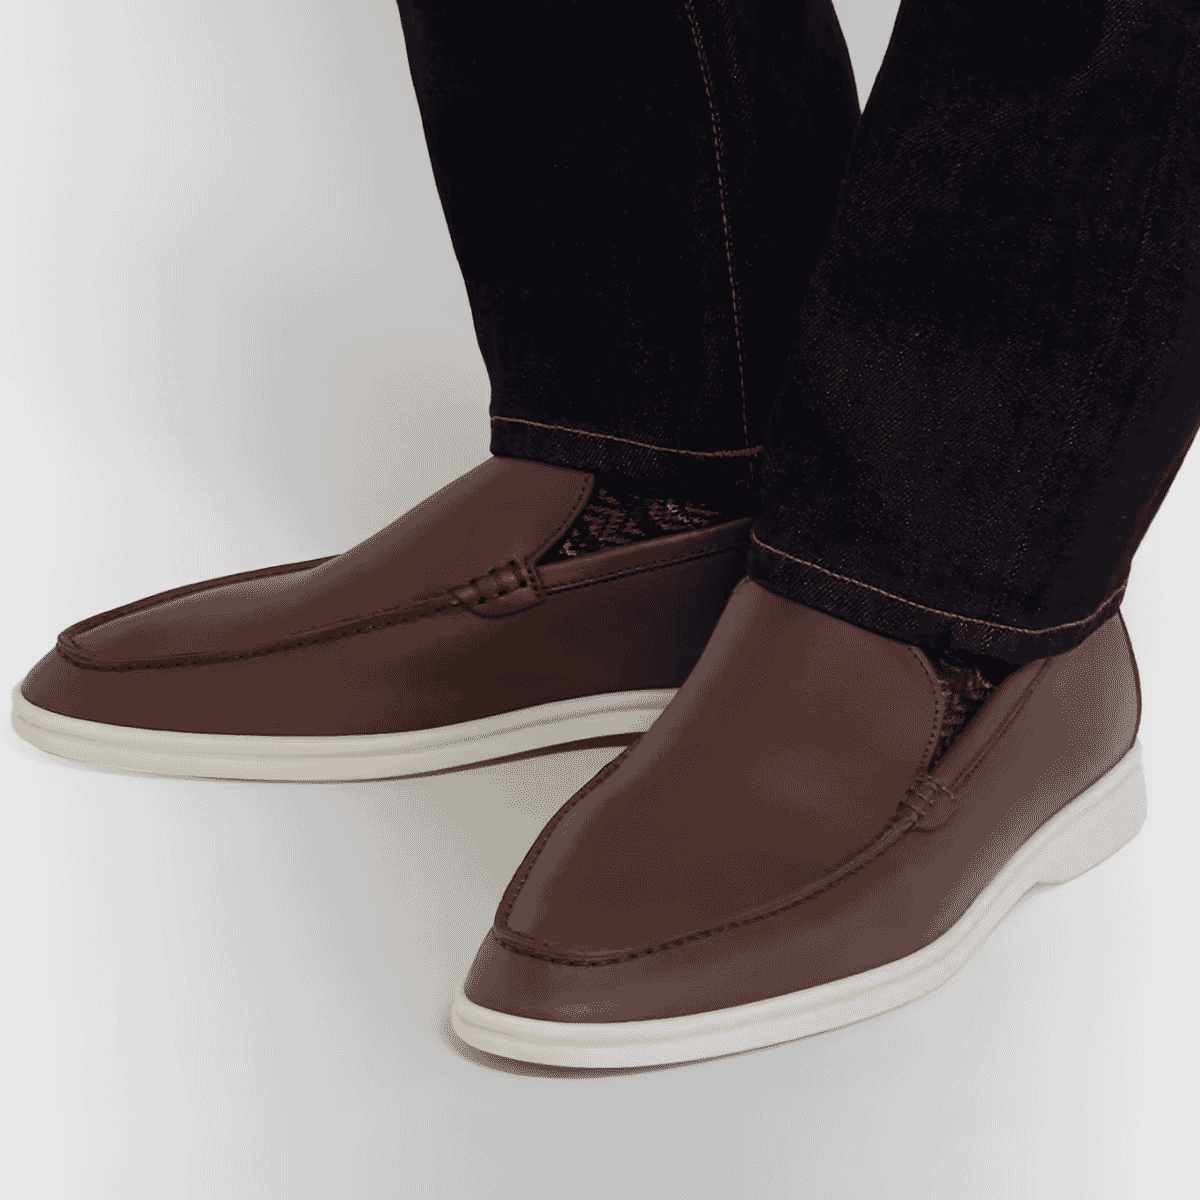 16 Best business casual shoes for men | OPUMO Magazine | OPUMO Magazine